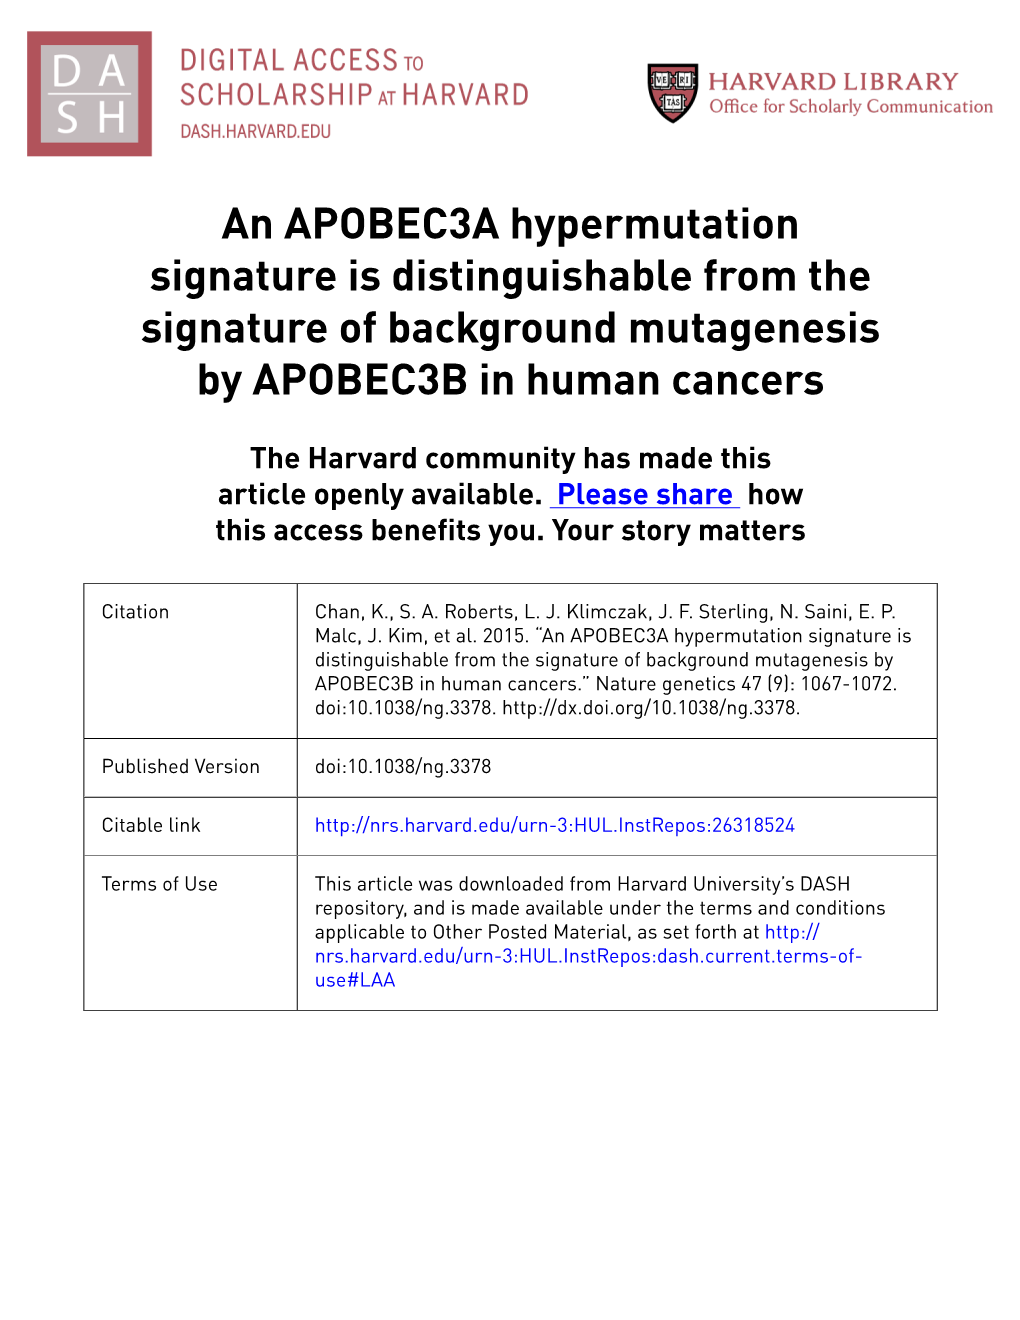 An APOBEC3A Hypermutation Signature Is Distinguishable from the Signature of Background Mutagenesis by APOBEC3B in Human Cancers